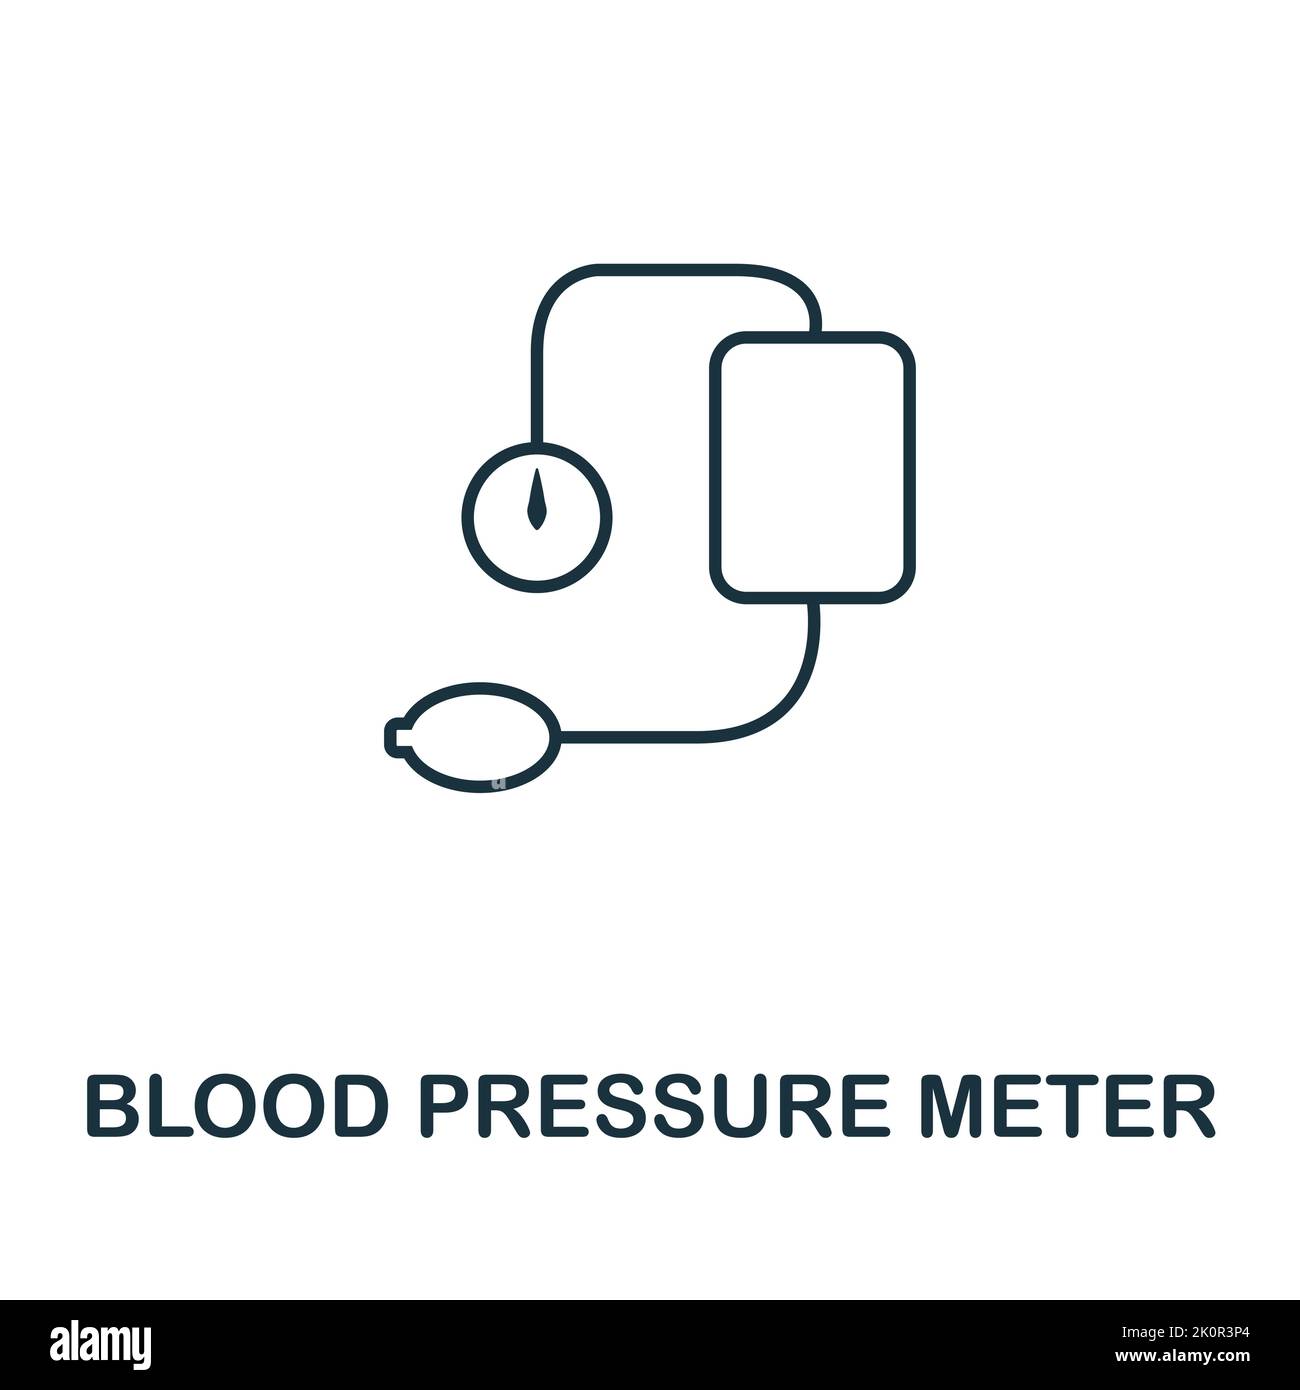 Blood Pressure Meter icon. Monocrome element from medical services collection. Blood Pressure Meter icon for banners, infographics and templates. Stock Vector